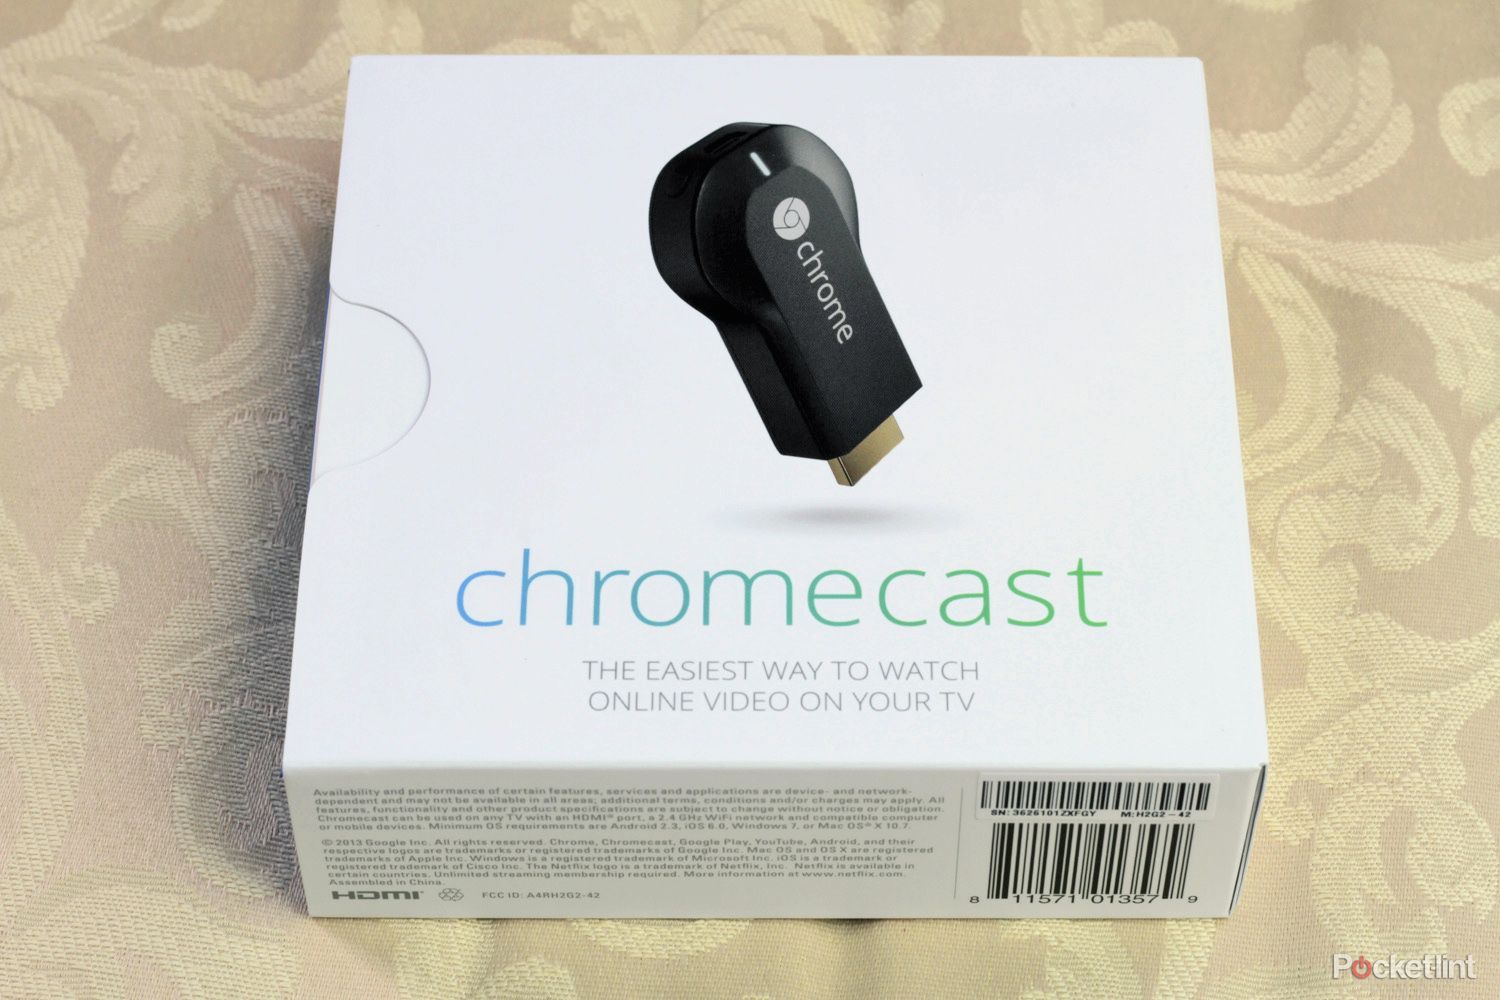 buy a chromecast in the uk and get 4 99 free google play credit image 1